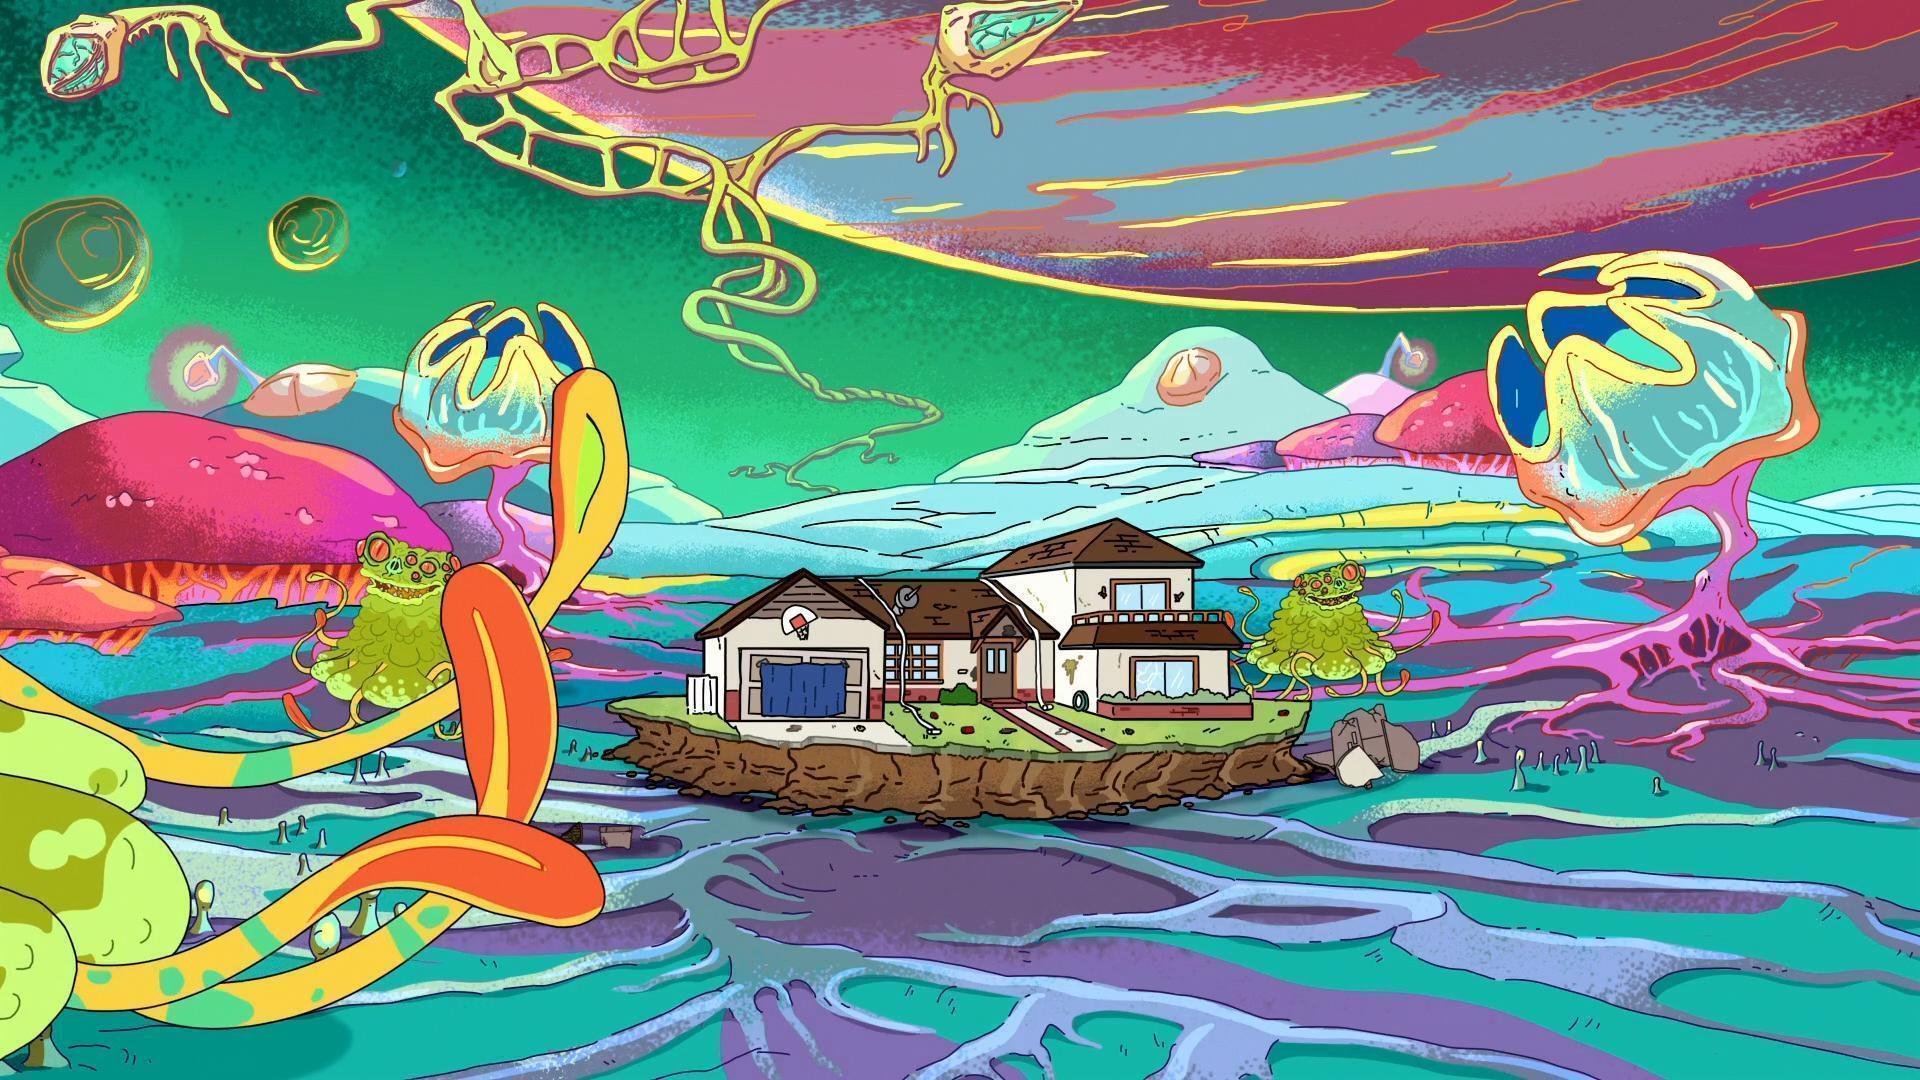 Download Psychedelic Rick And Morty PC 4K Wallpaper